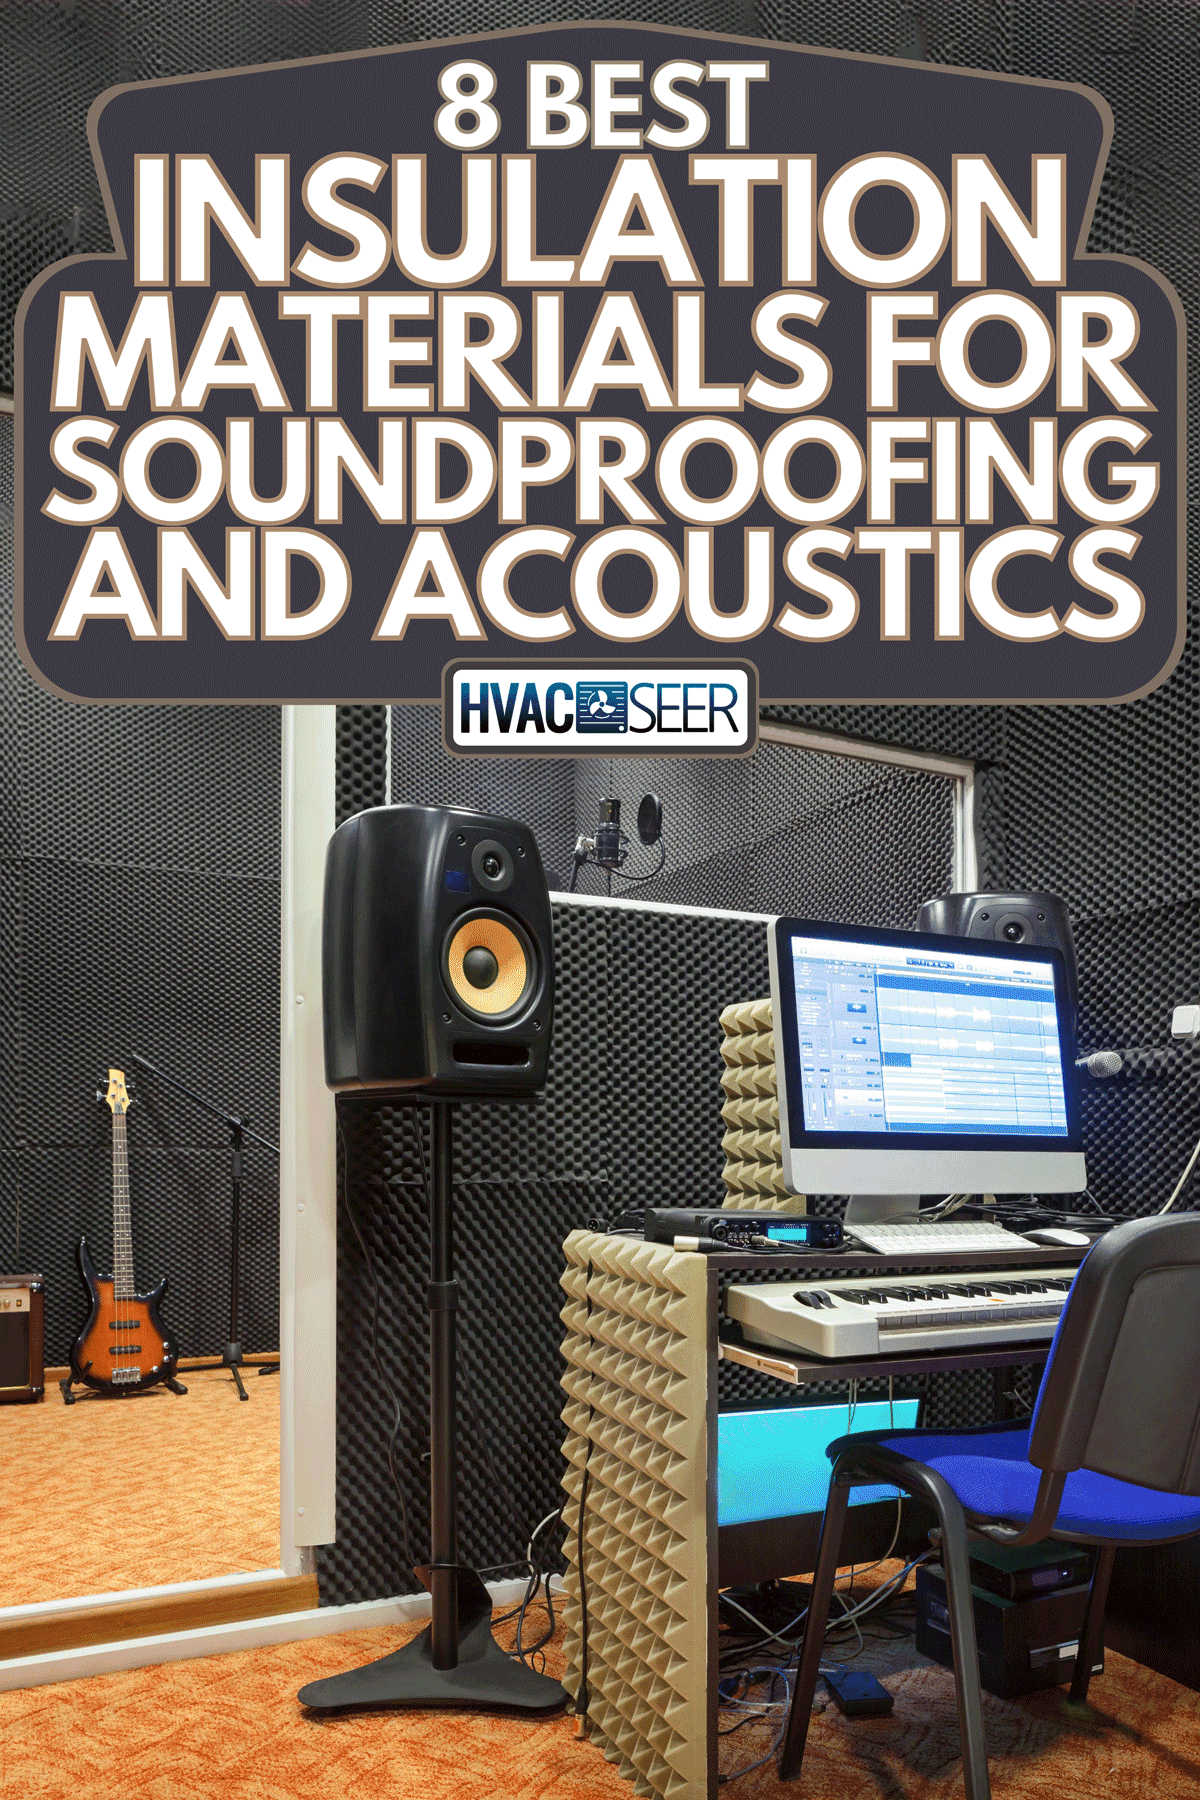 A sound engineer workplace, 8 Best Insulation Materials For Soundproofing And Acoustics